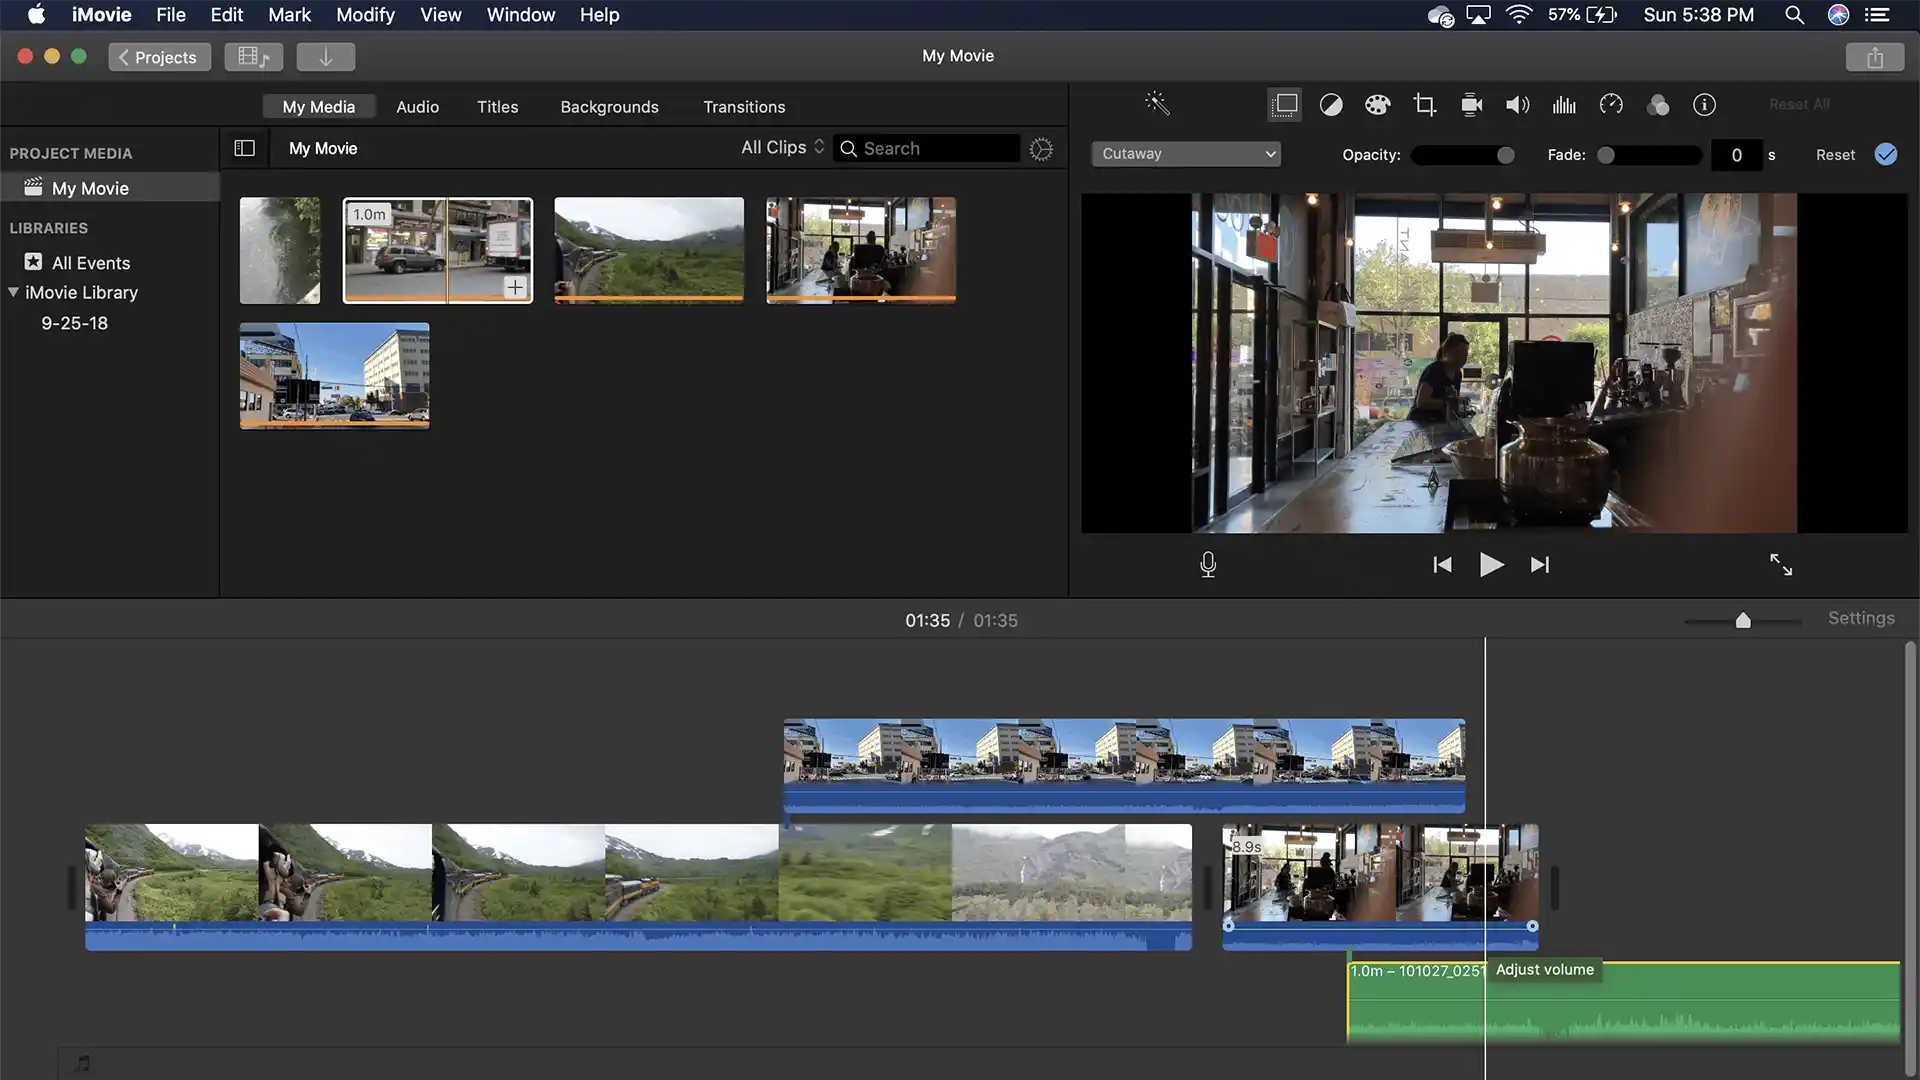 Apple iMovie - Free video editing software that Apple users already have.